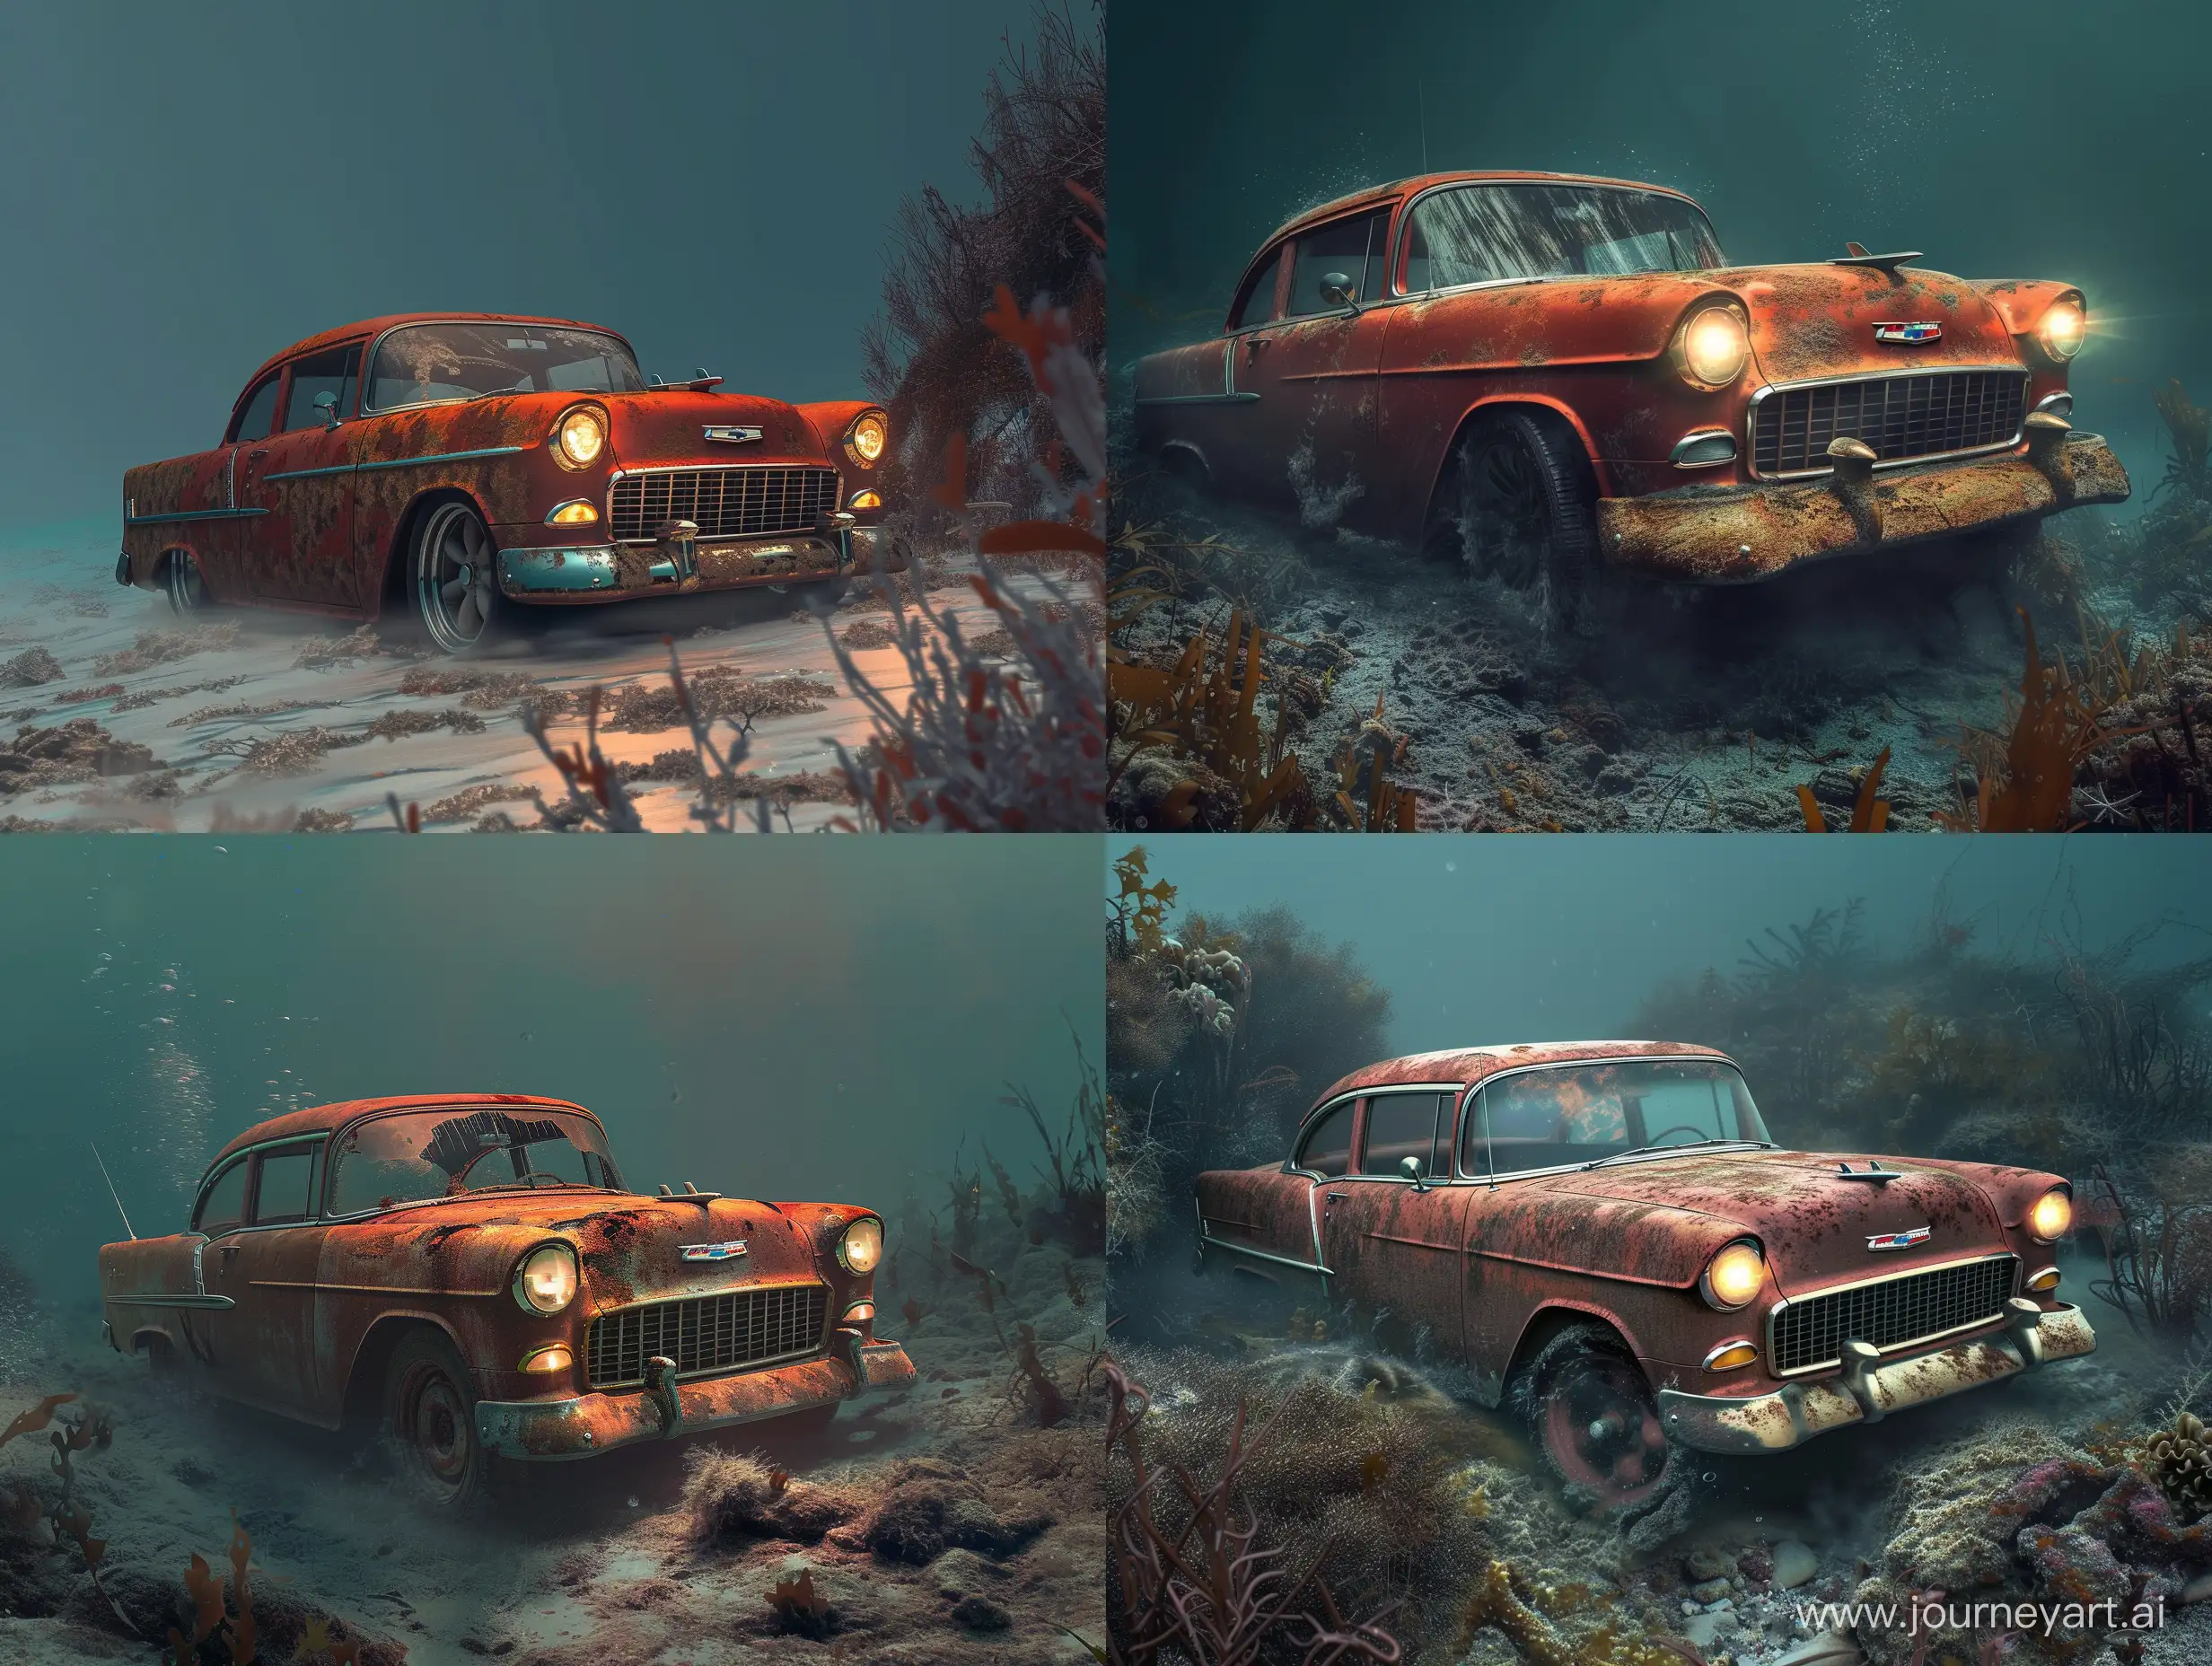 Photographic and hyperrealistic style of a car driving along the seabed, exploring it, the car is a chevrolet bel air 55, red color, it is rusty but still has the lights on